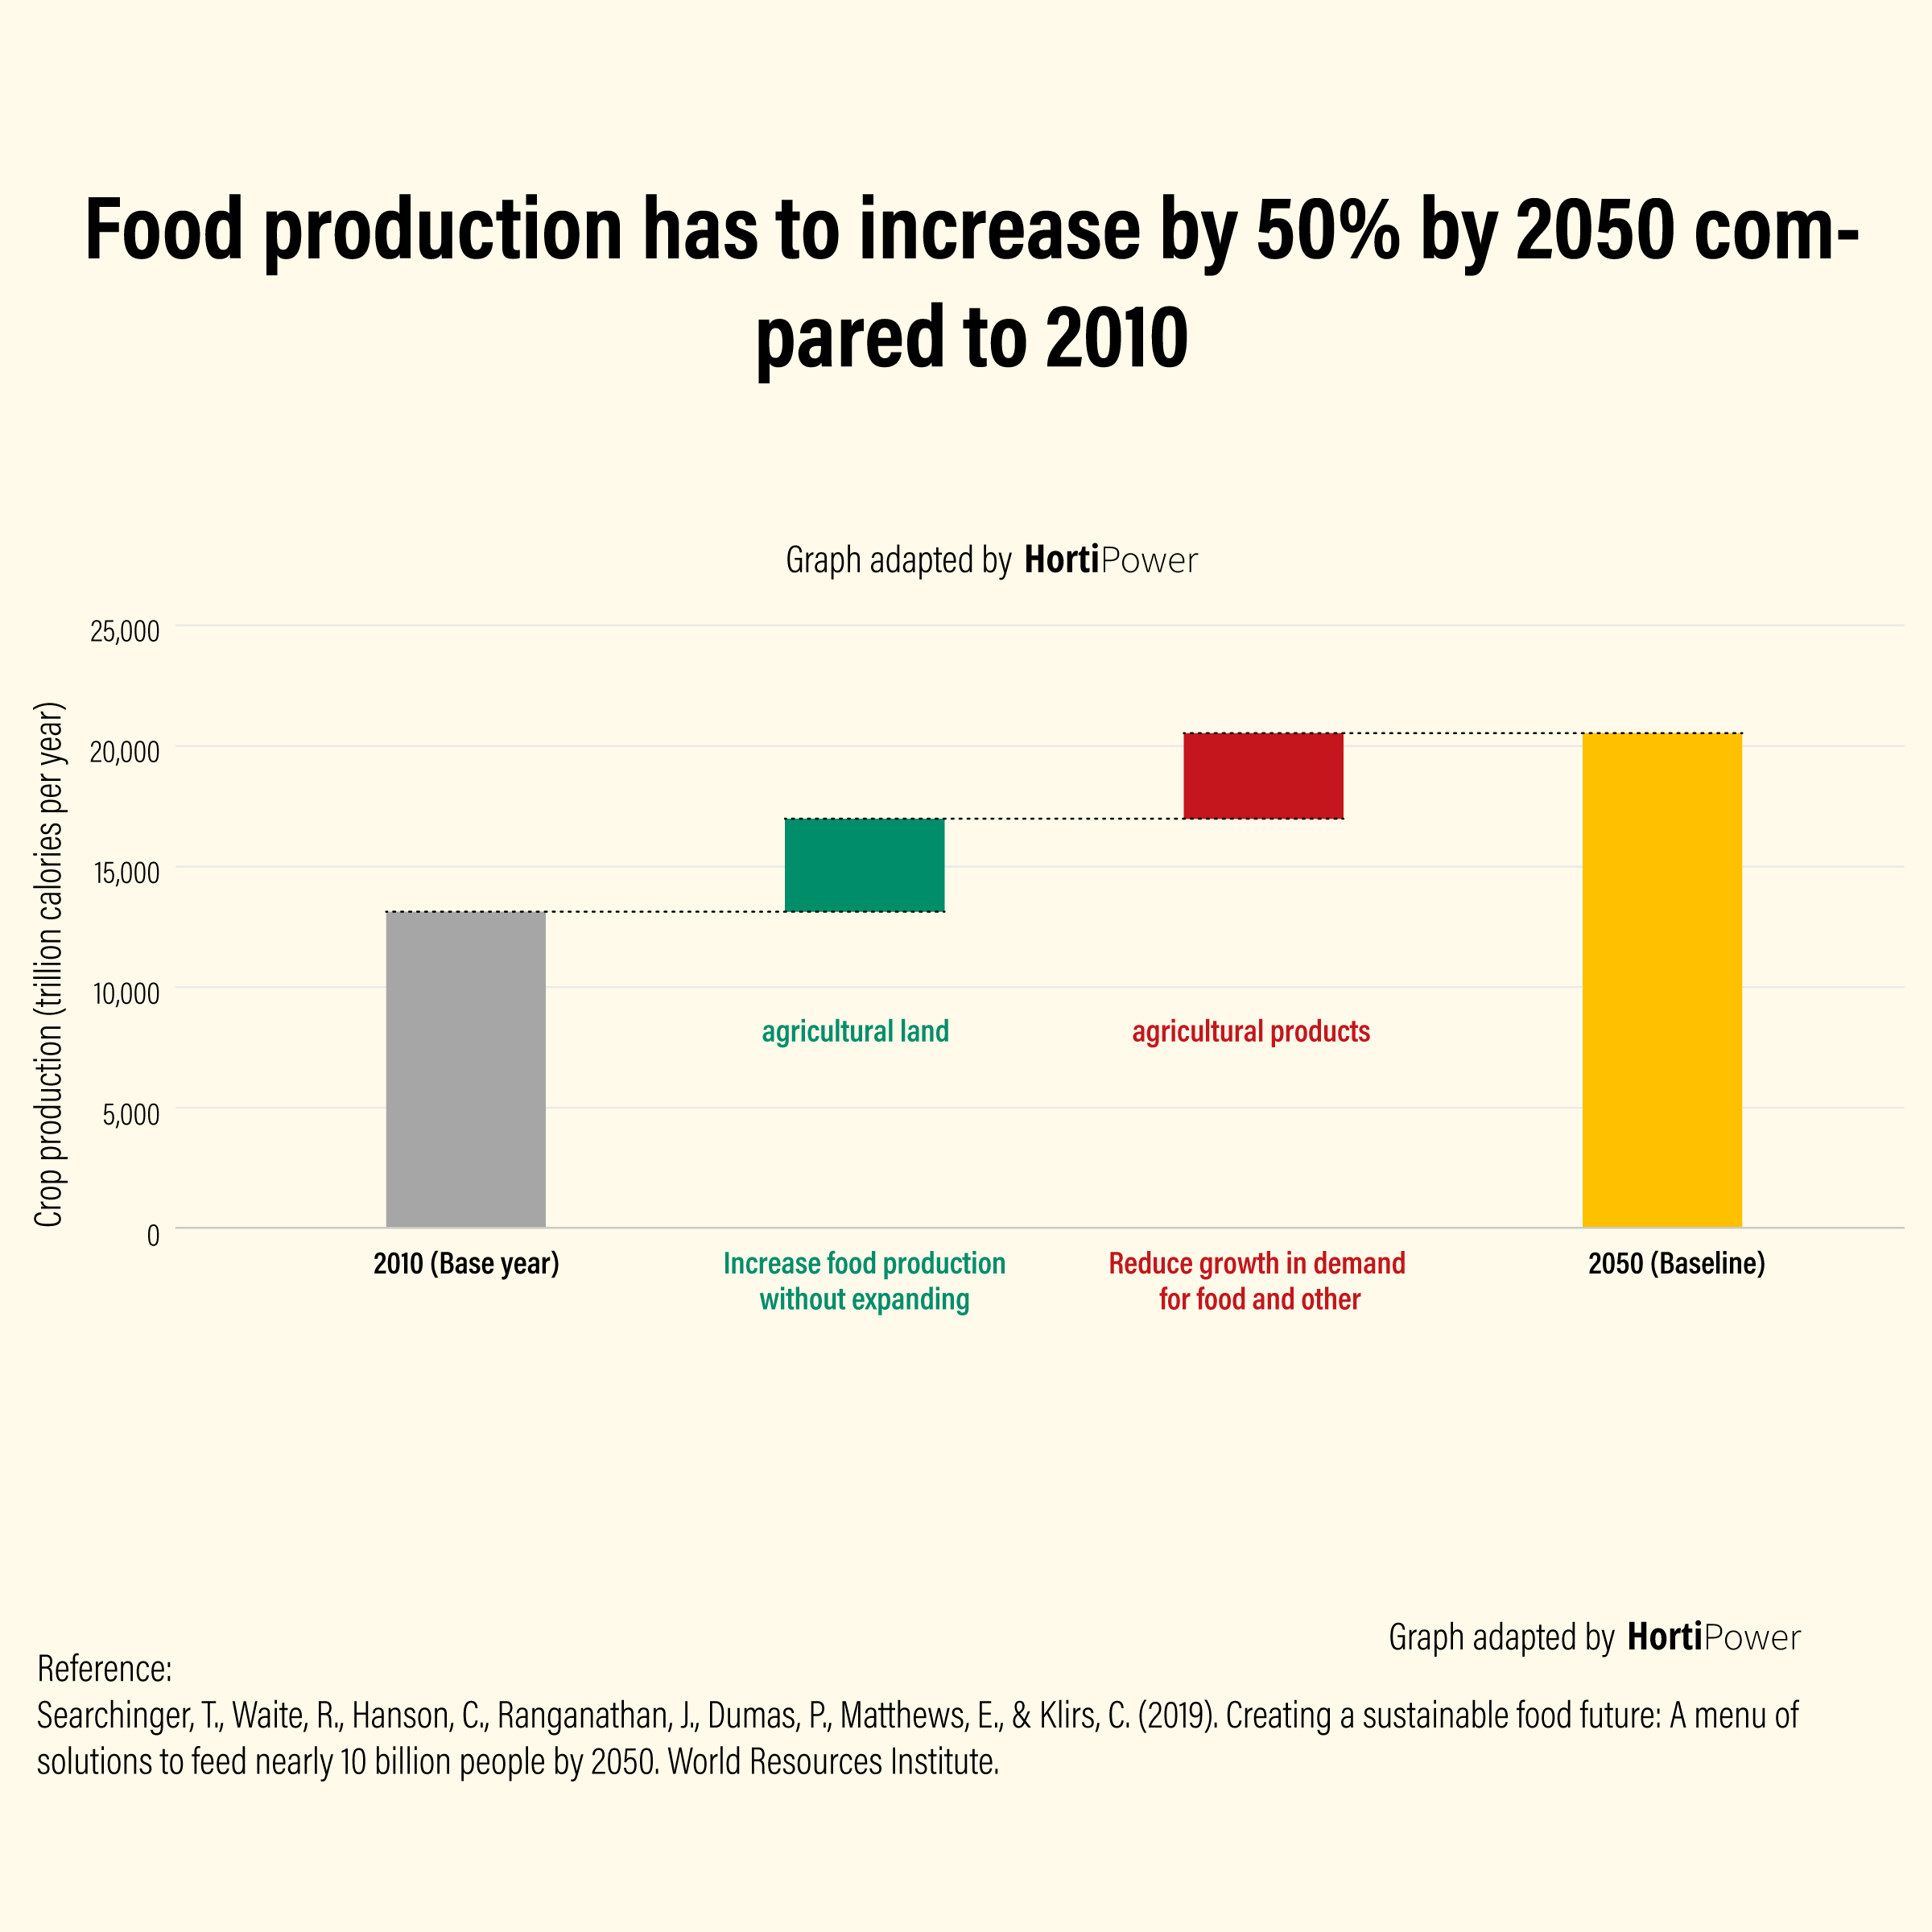 Food-production-has-to-increase-by-50%-by-2050-compared-to-2010